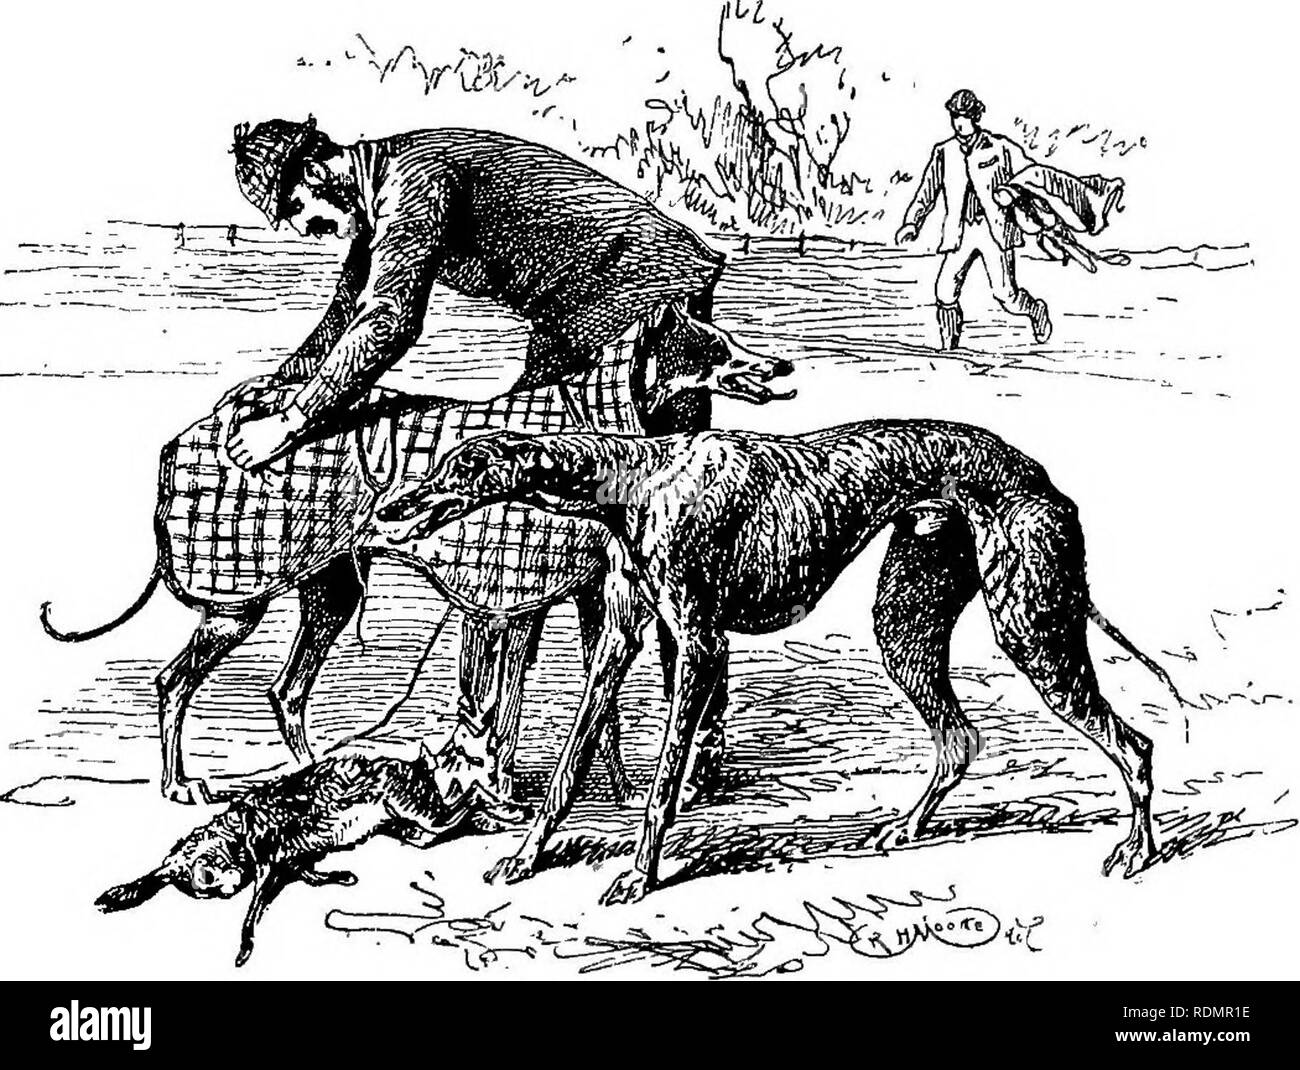 . Coursing and falconry. Coursing; Falconry. THE WATERLOO CUP 17 was a rank outsider, and he put out Muriel in the first ties ; she, however, making amends by winning the Purse. In 1875 the Irish were again successful with their much- fancied representative Honeymoon, the favourite Sirius going down the first round. The next year (1875) Honeymoon, who in the interim had won the important Brownlow Cup, started a hot favourite at II to 2. She beat in grand style Warren Hastings, Handicraft,. He's had enough , and Lucetta, but in the next round fell foul of her compatriot and kennel companion, Do Stock Photo